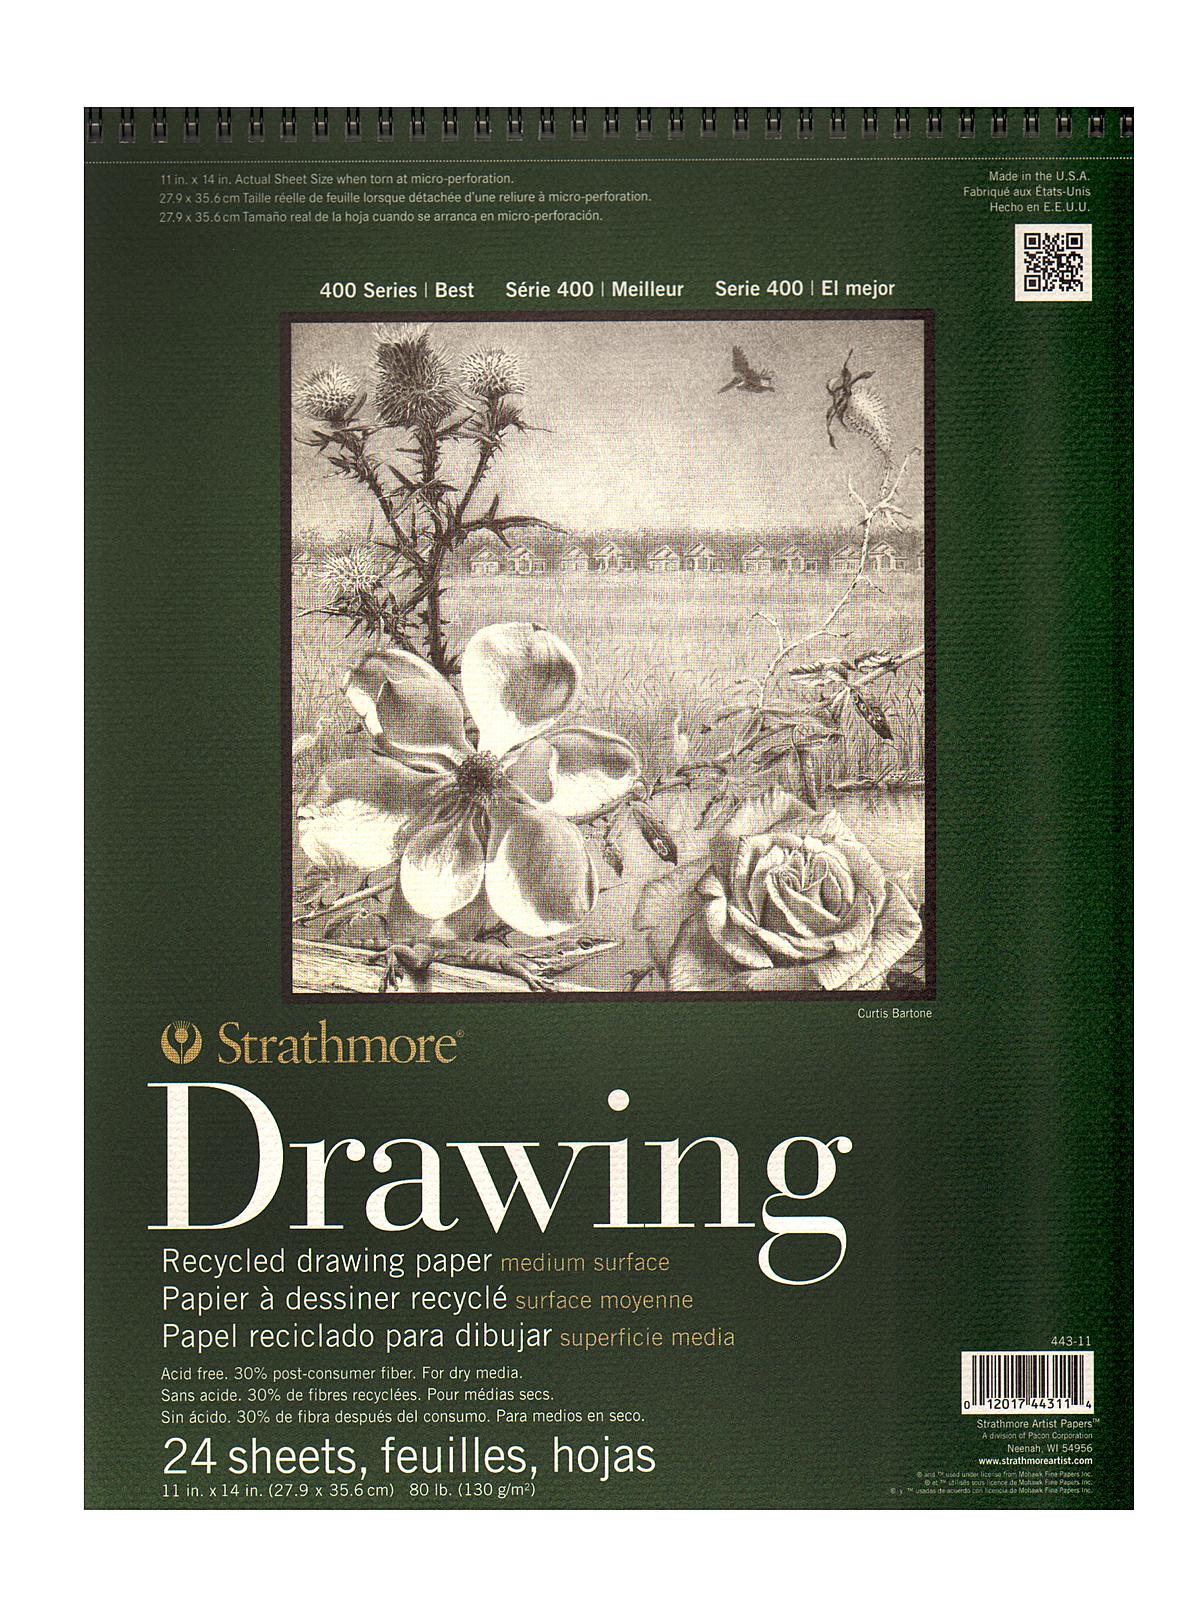 Series 400 Premium Recycled Drawing Pads 11 In. X 14 In.